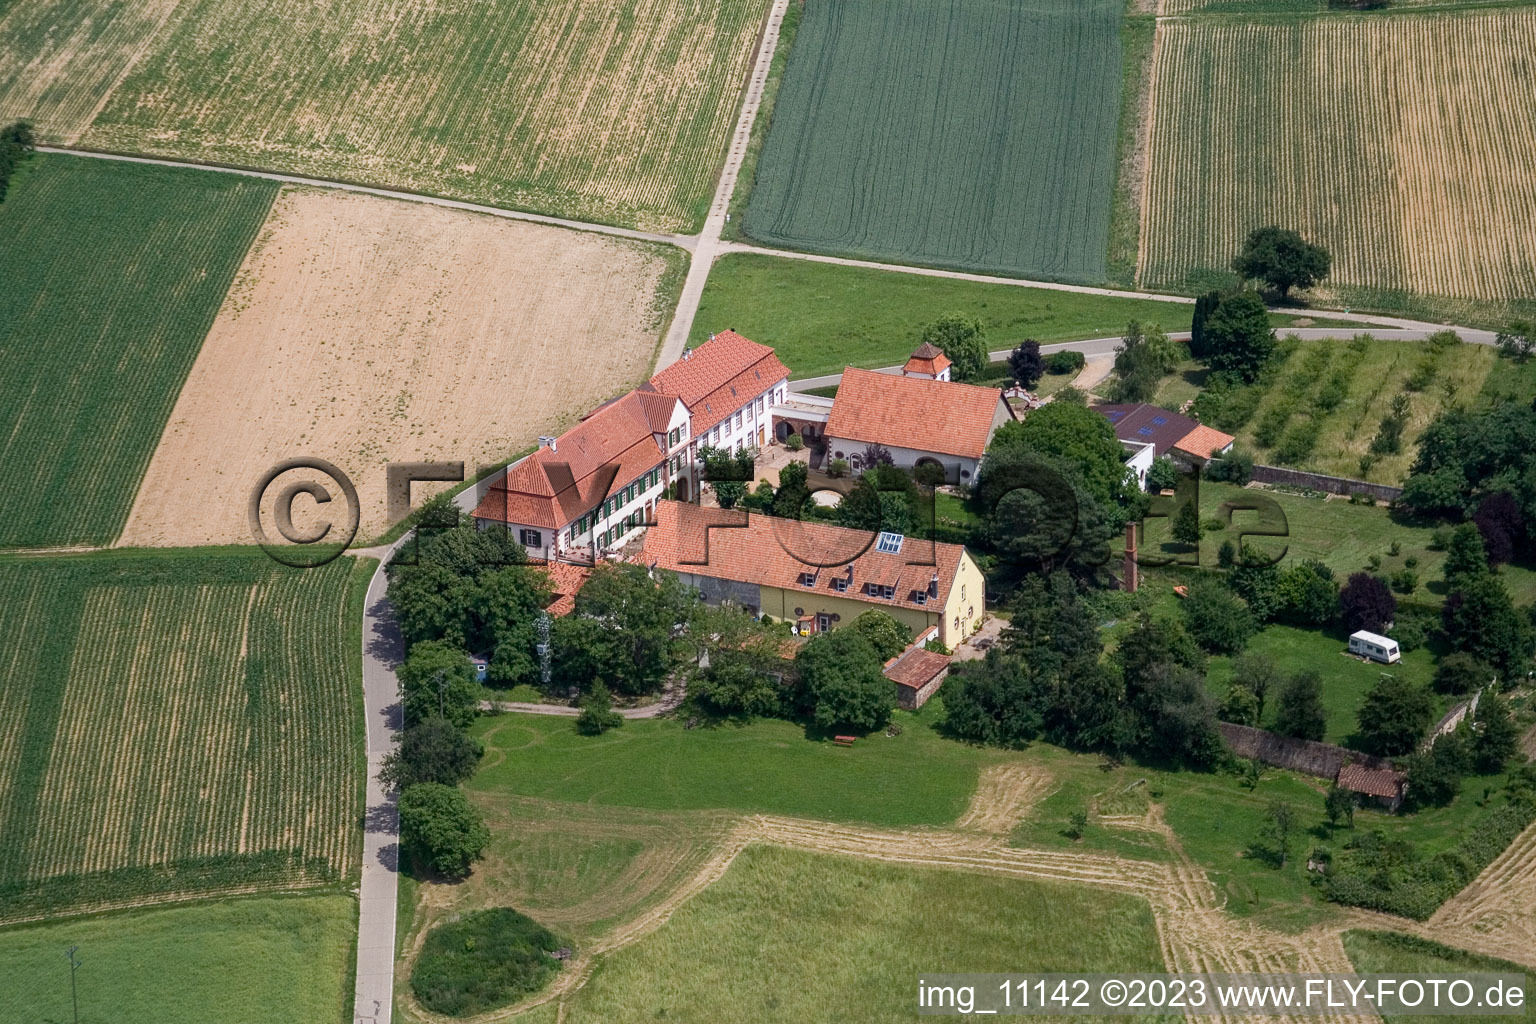 Aerial view of Workshop for Assisted Living of hidden Talents GmbH in the district Haftelhof in Schweighofen in the state Rhineland-Palatinate, Germany